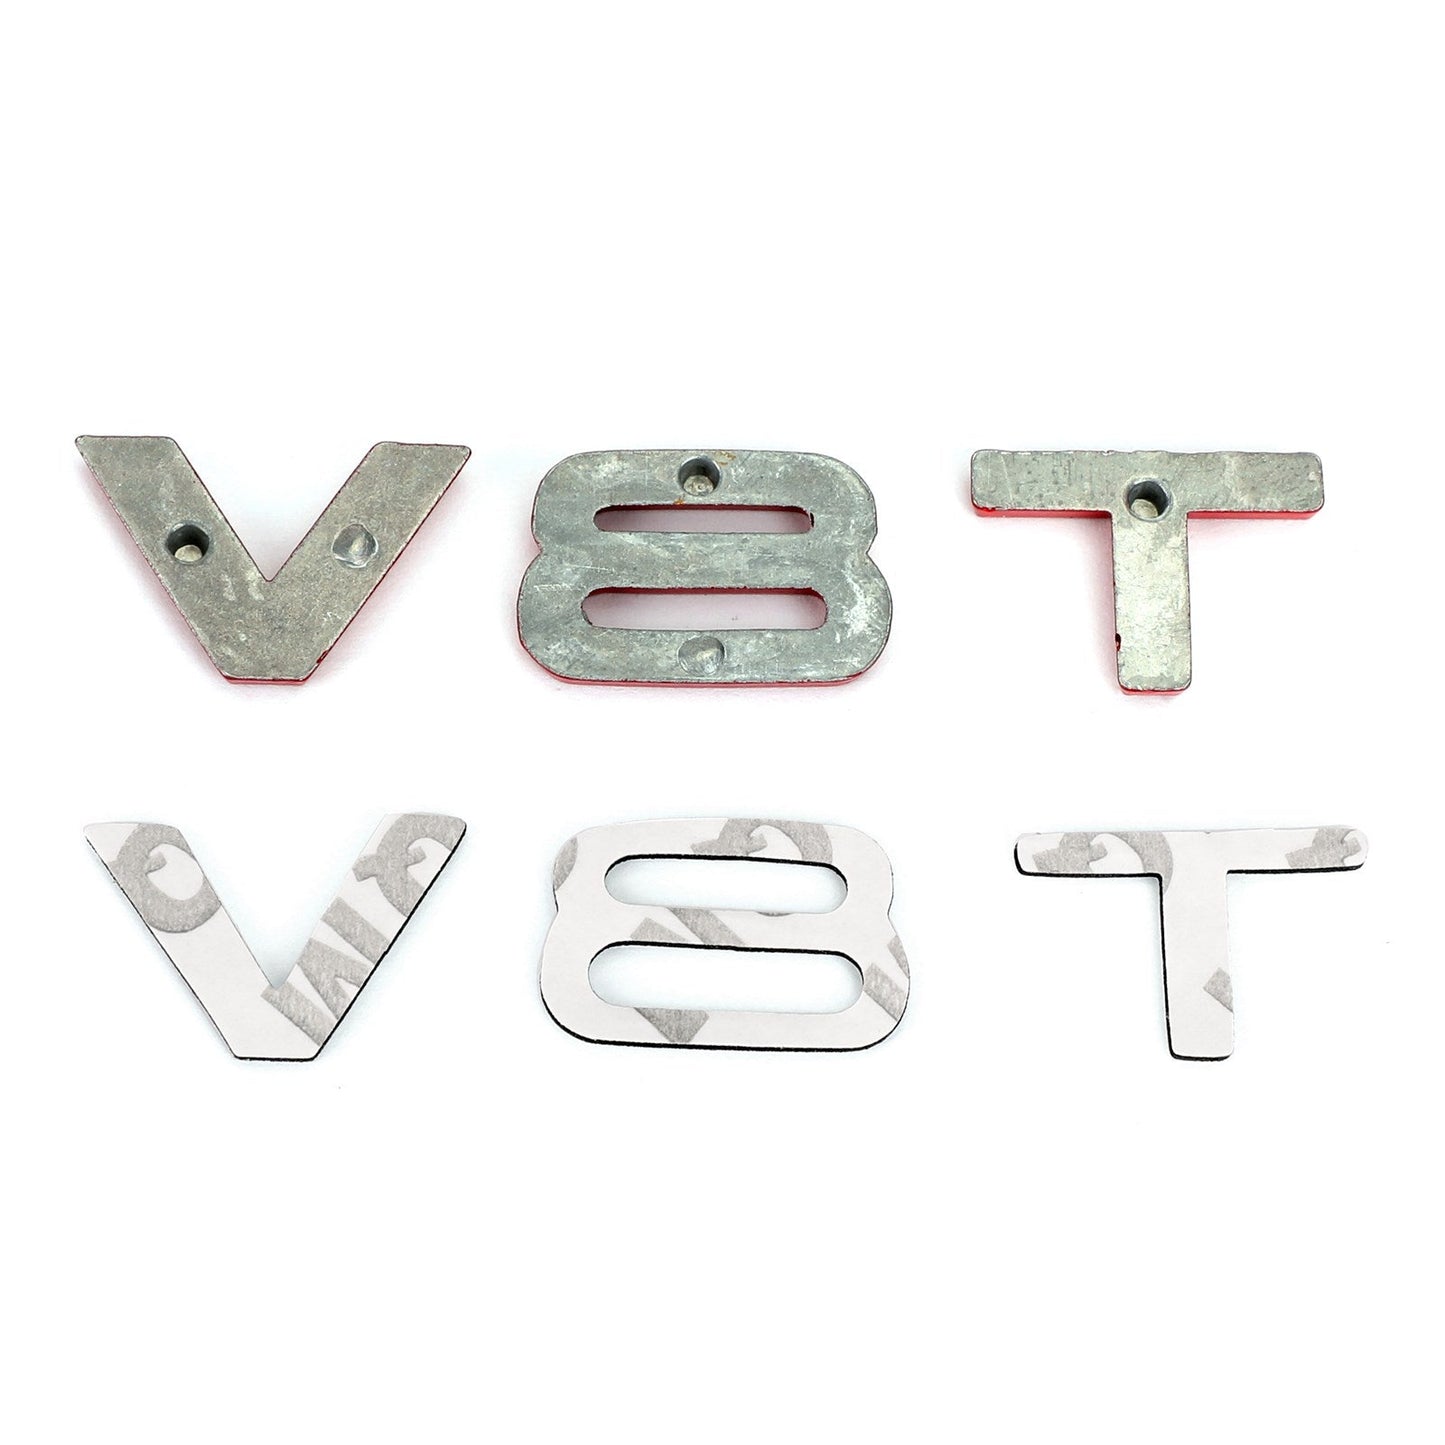 V8T Emblem Badge Fit For AUDI A1 A3 A4 A5 A6 A7 Q3 Q5 Q7 S6 S7 S8 S4 SQ5 Red